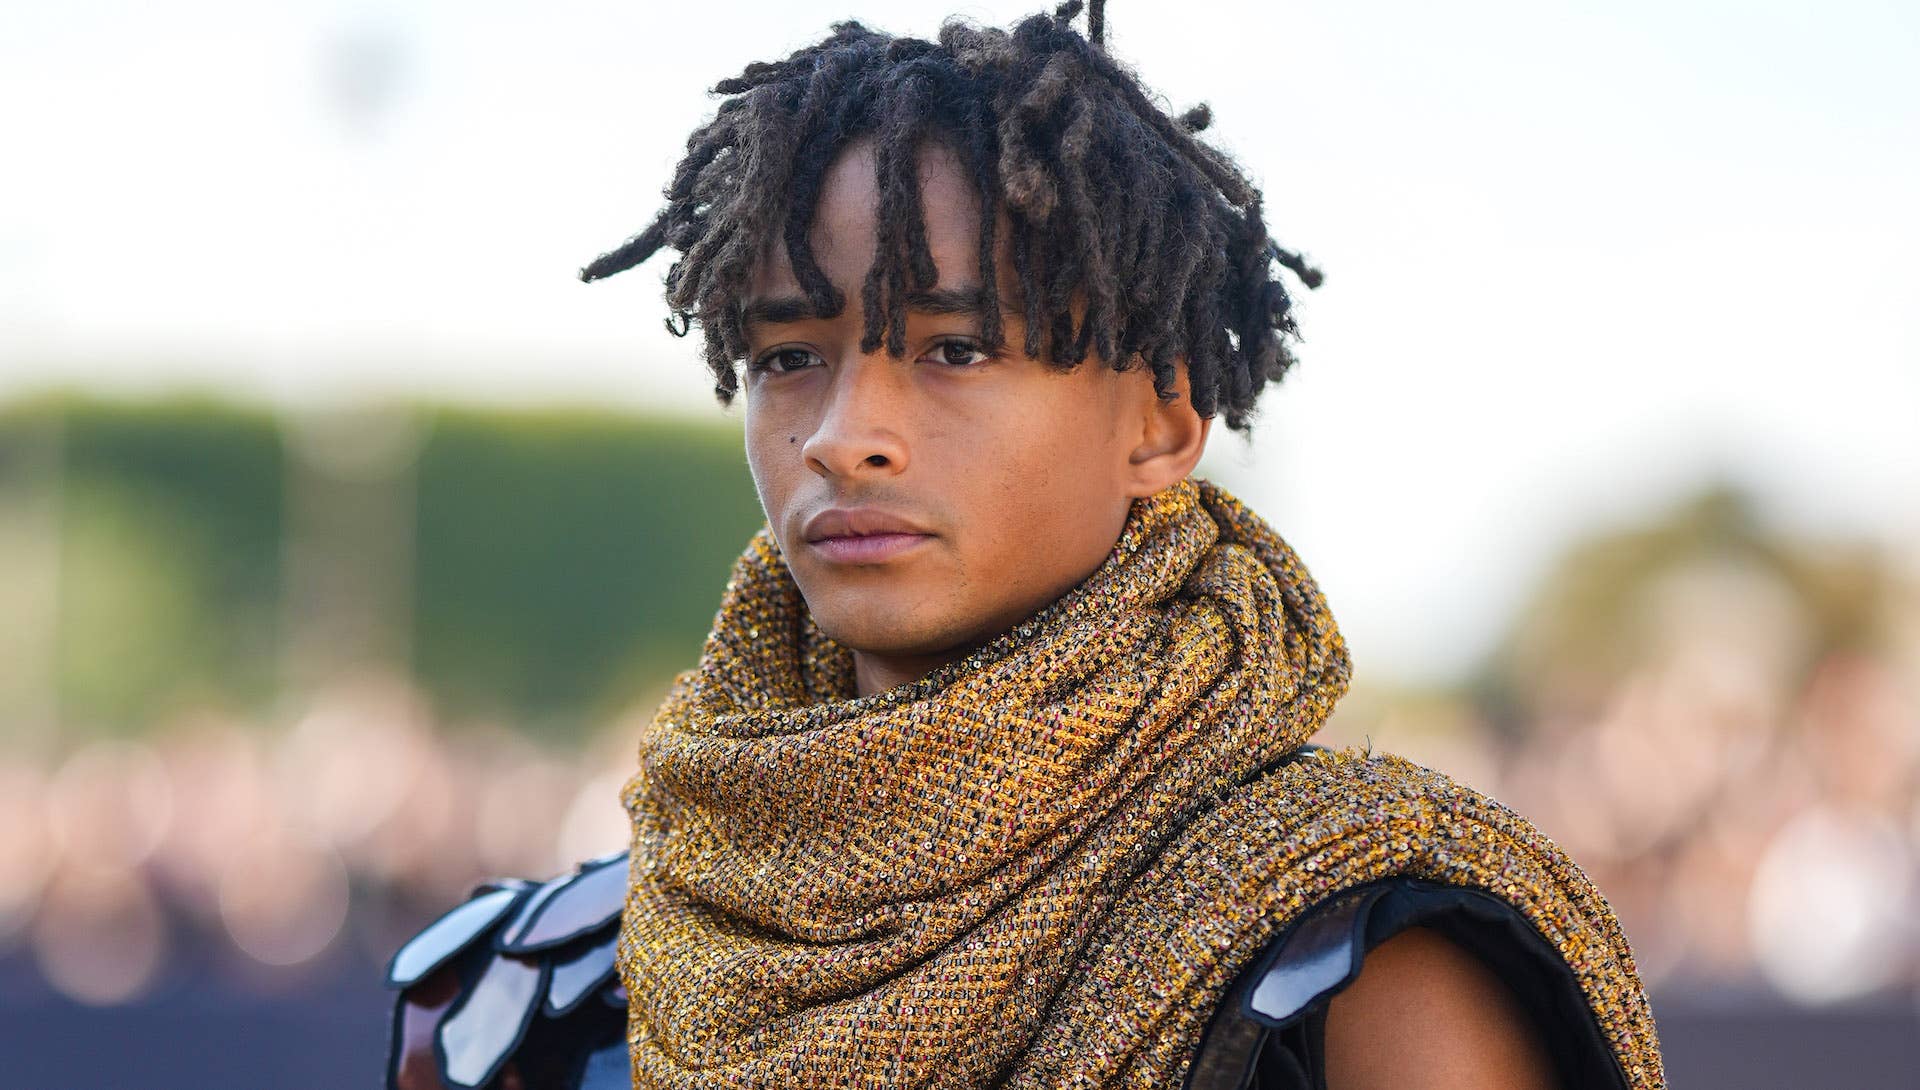 Jaden Smith Announces Video for “Still in Love” With Tearful Clip to Fans